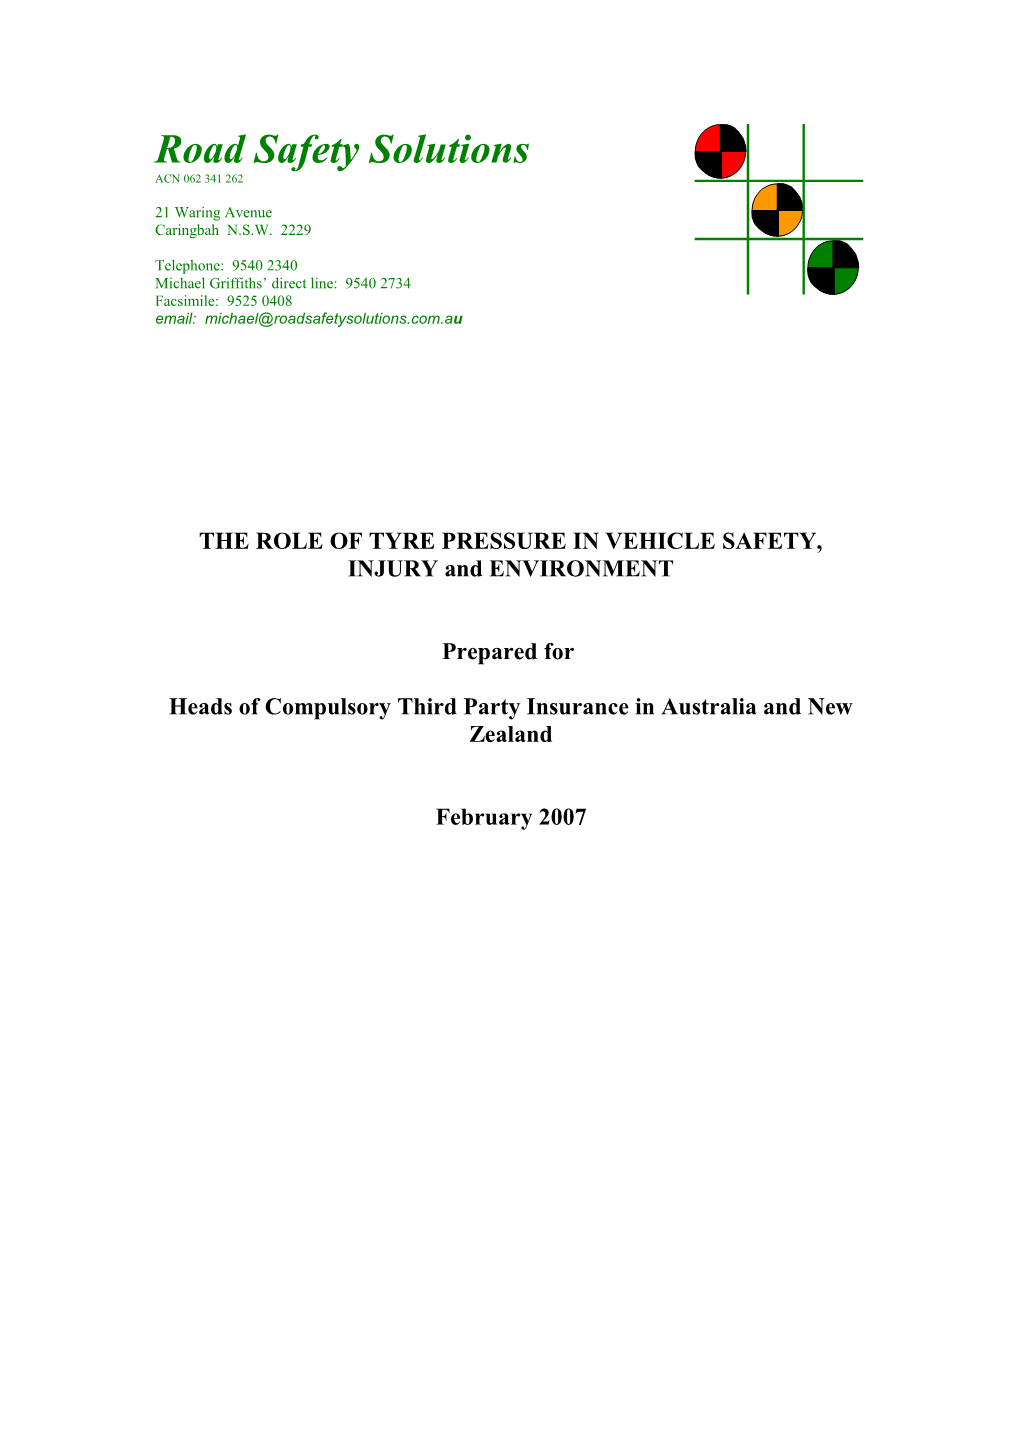 THE ROLE of TYRE PRESSURE in VEHICLE SAFETY, INJURY and ENVIRONMENT